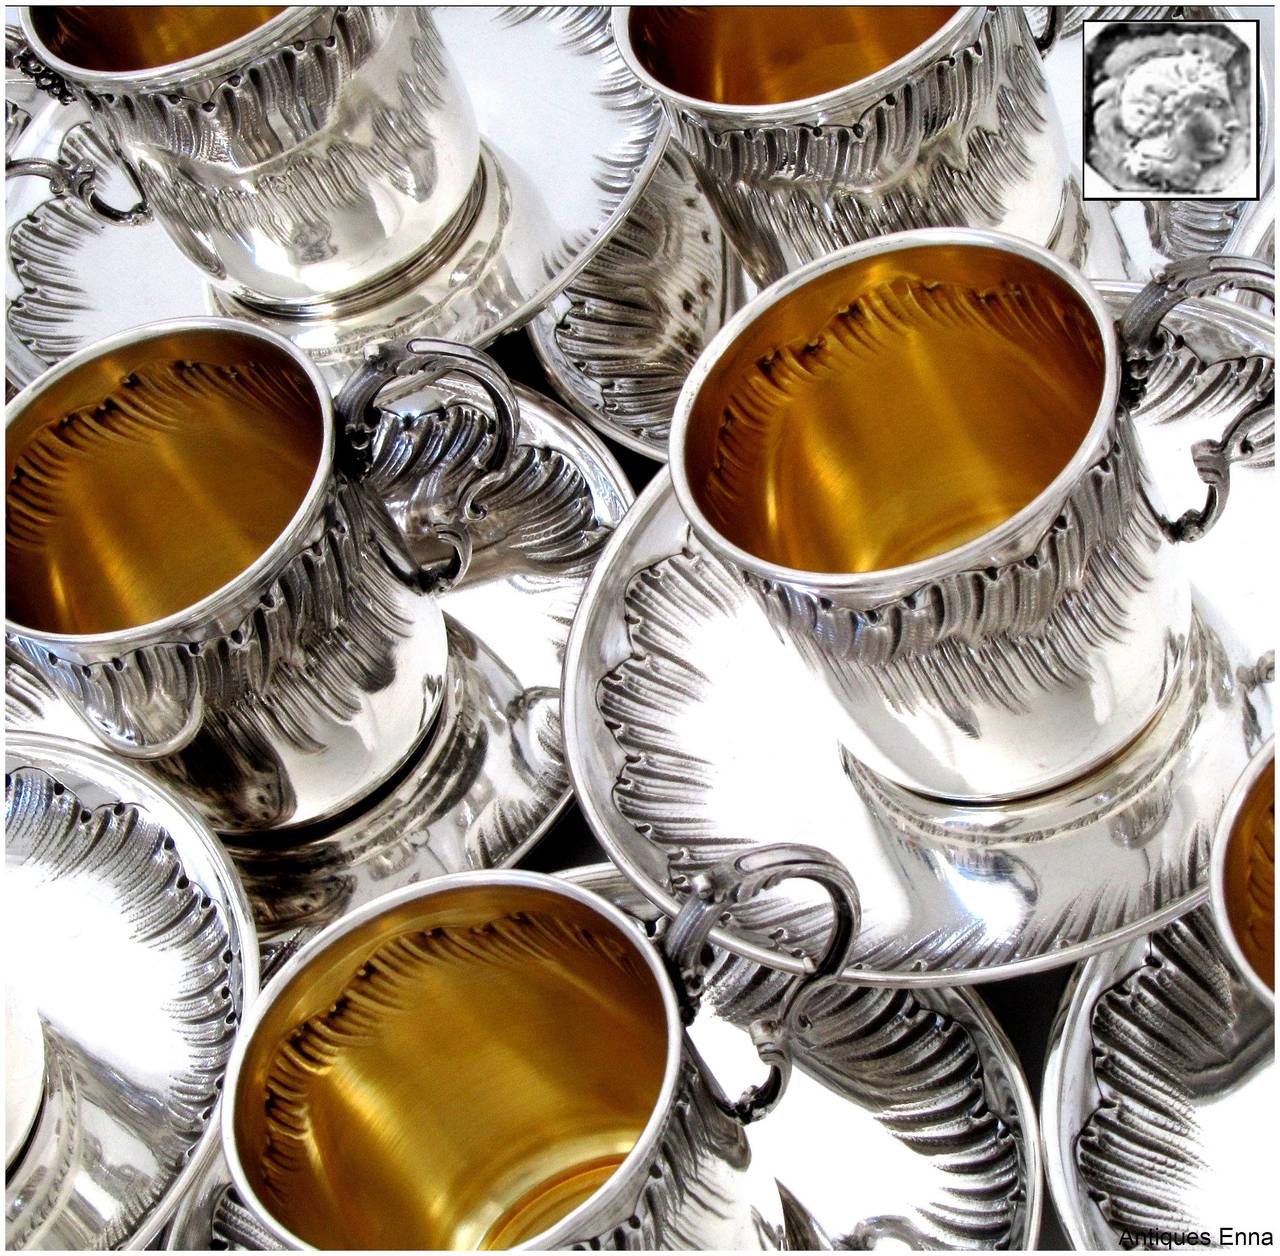 BOULENGER Rare French Sterling Silver Vermeil Twelve Coffee/Tea Cups w/Saucers Rococo pattern

Head of Minerve 1 st titre for 950/1000 French Sterling Silver Vermeil guarantee 

Exceptional and rare service 12 pc of French Sterling Silver